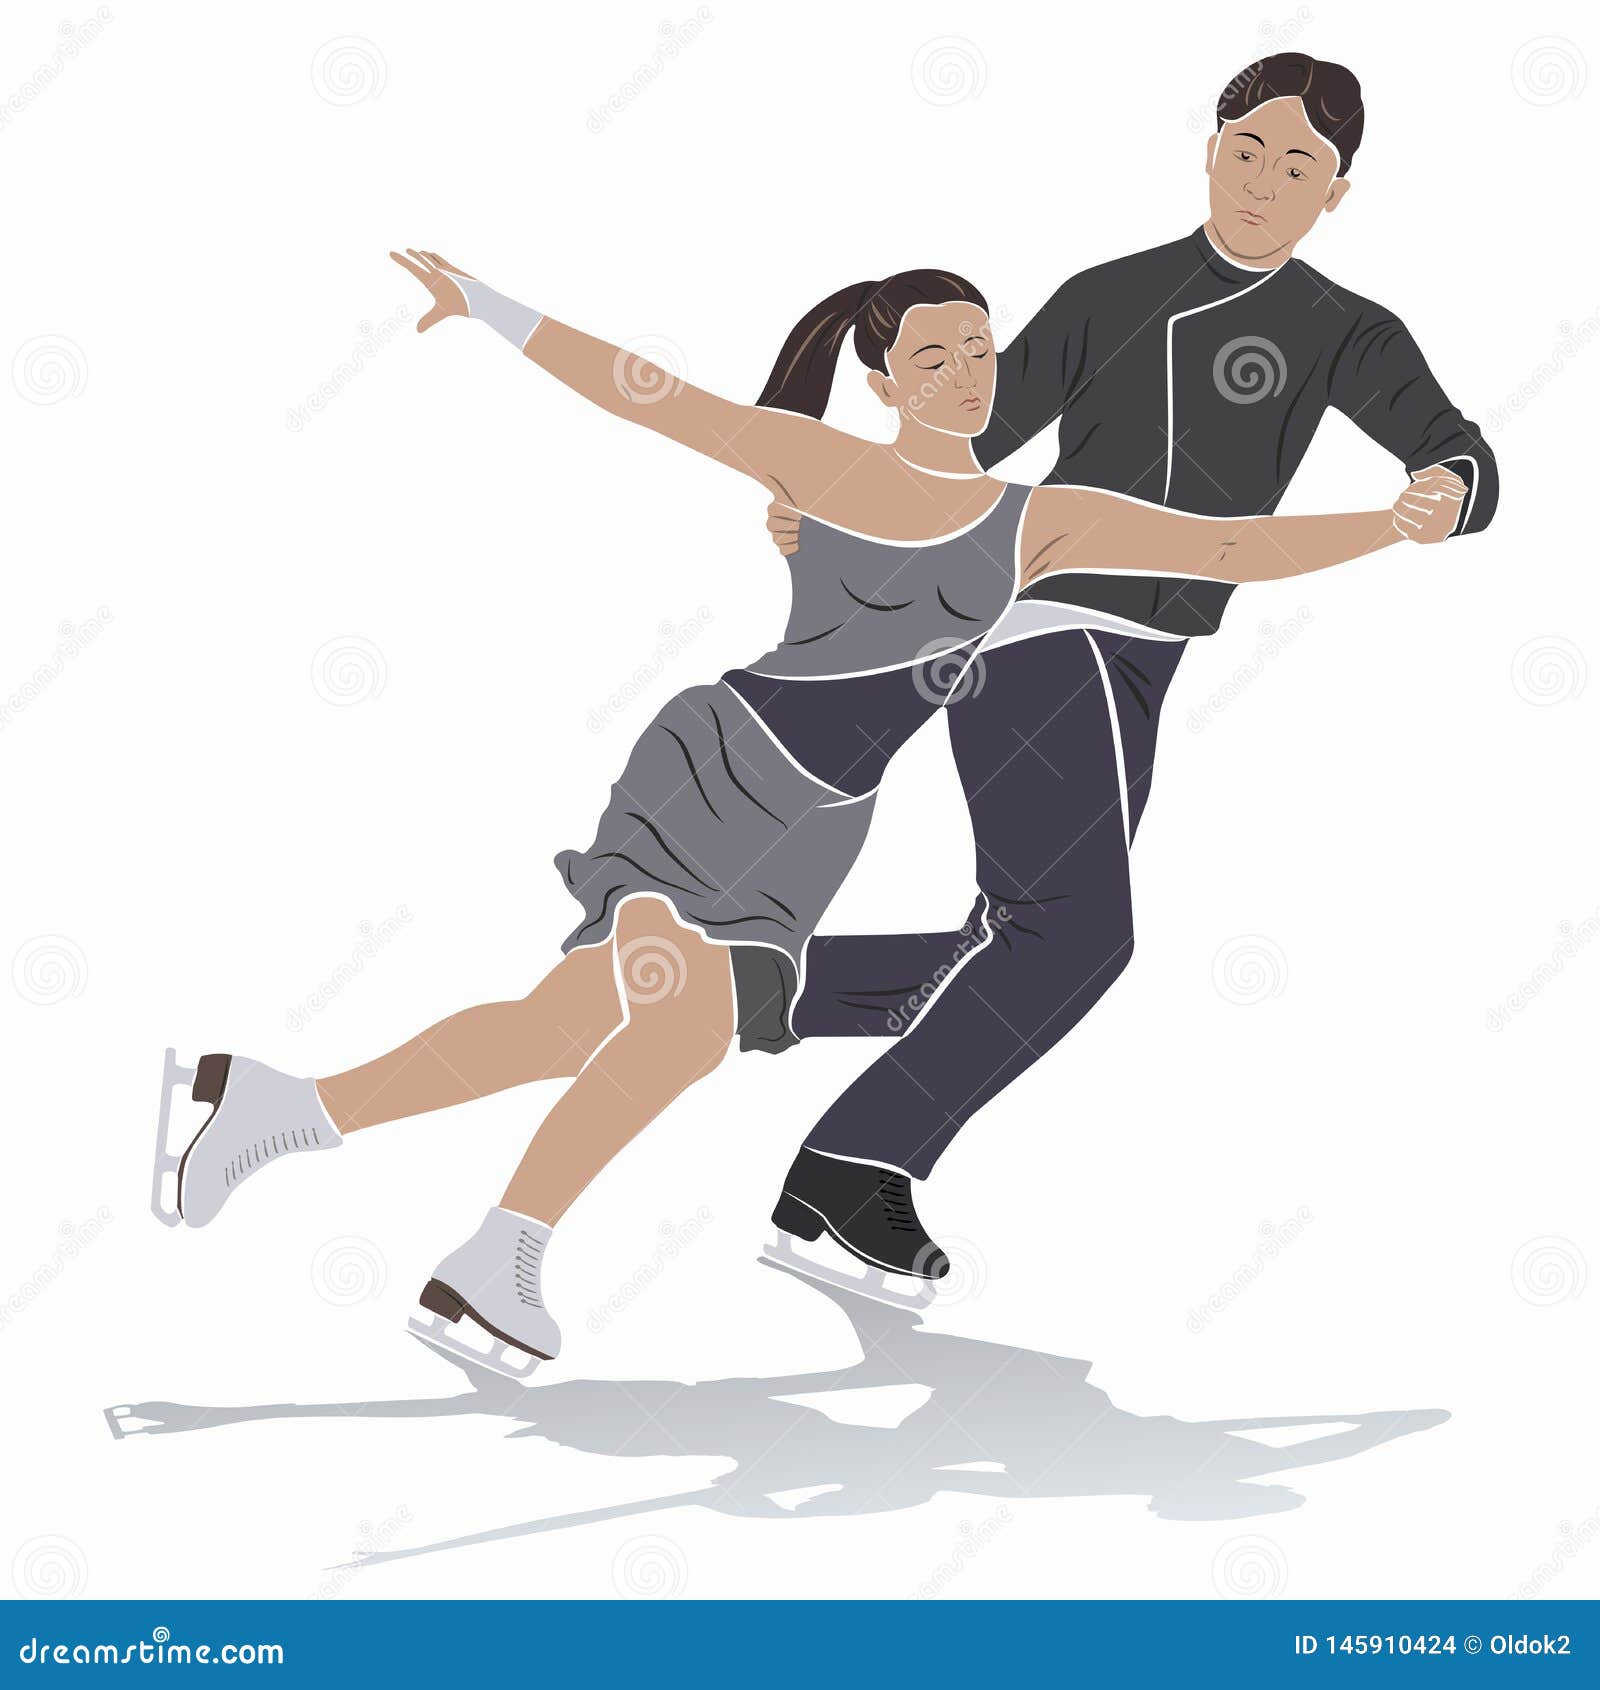 Illustration of Figure Skating Couple , Vector Draw Stock Vector